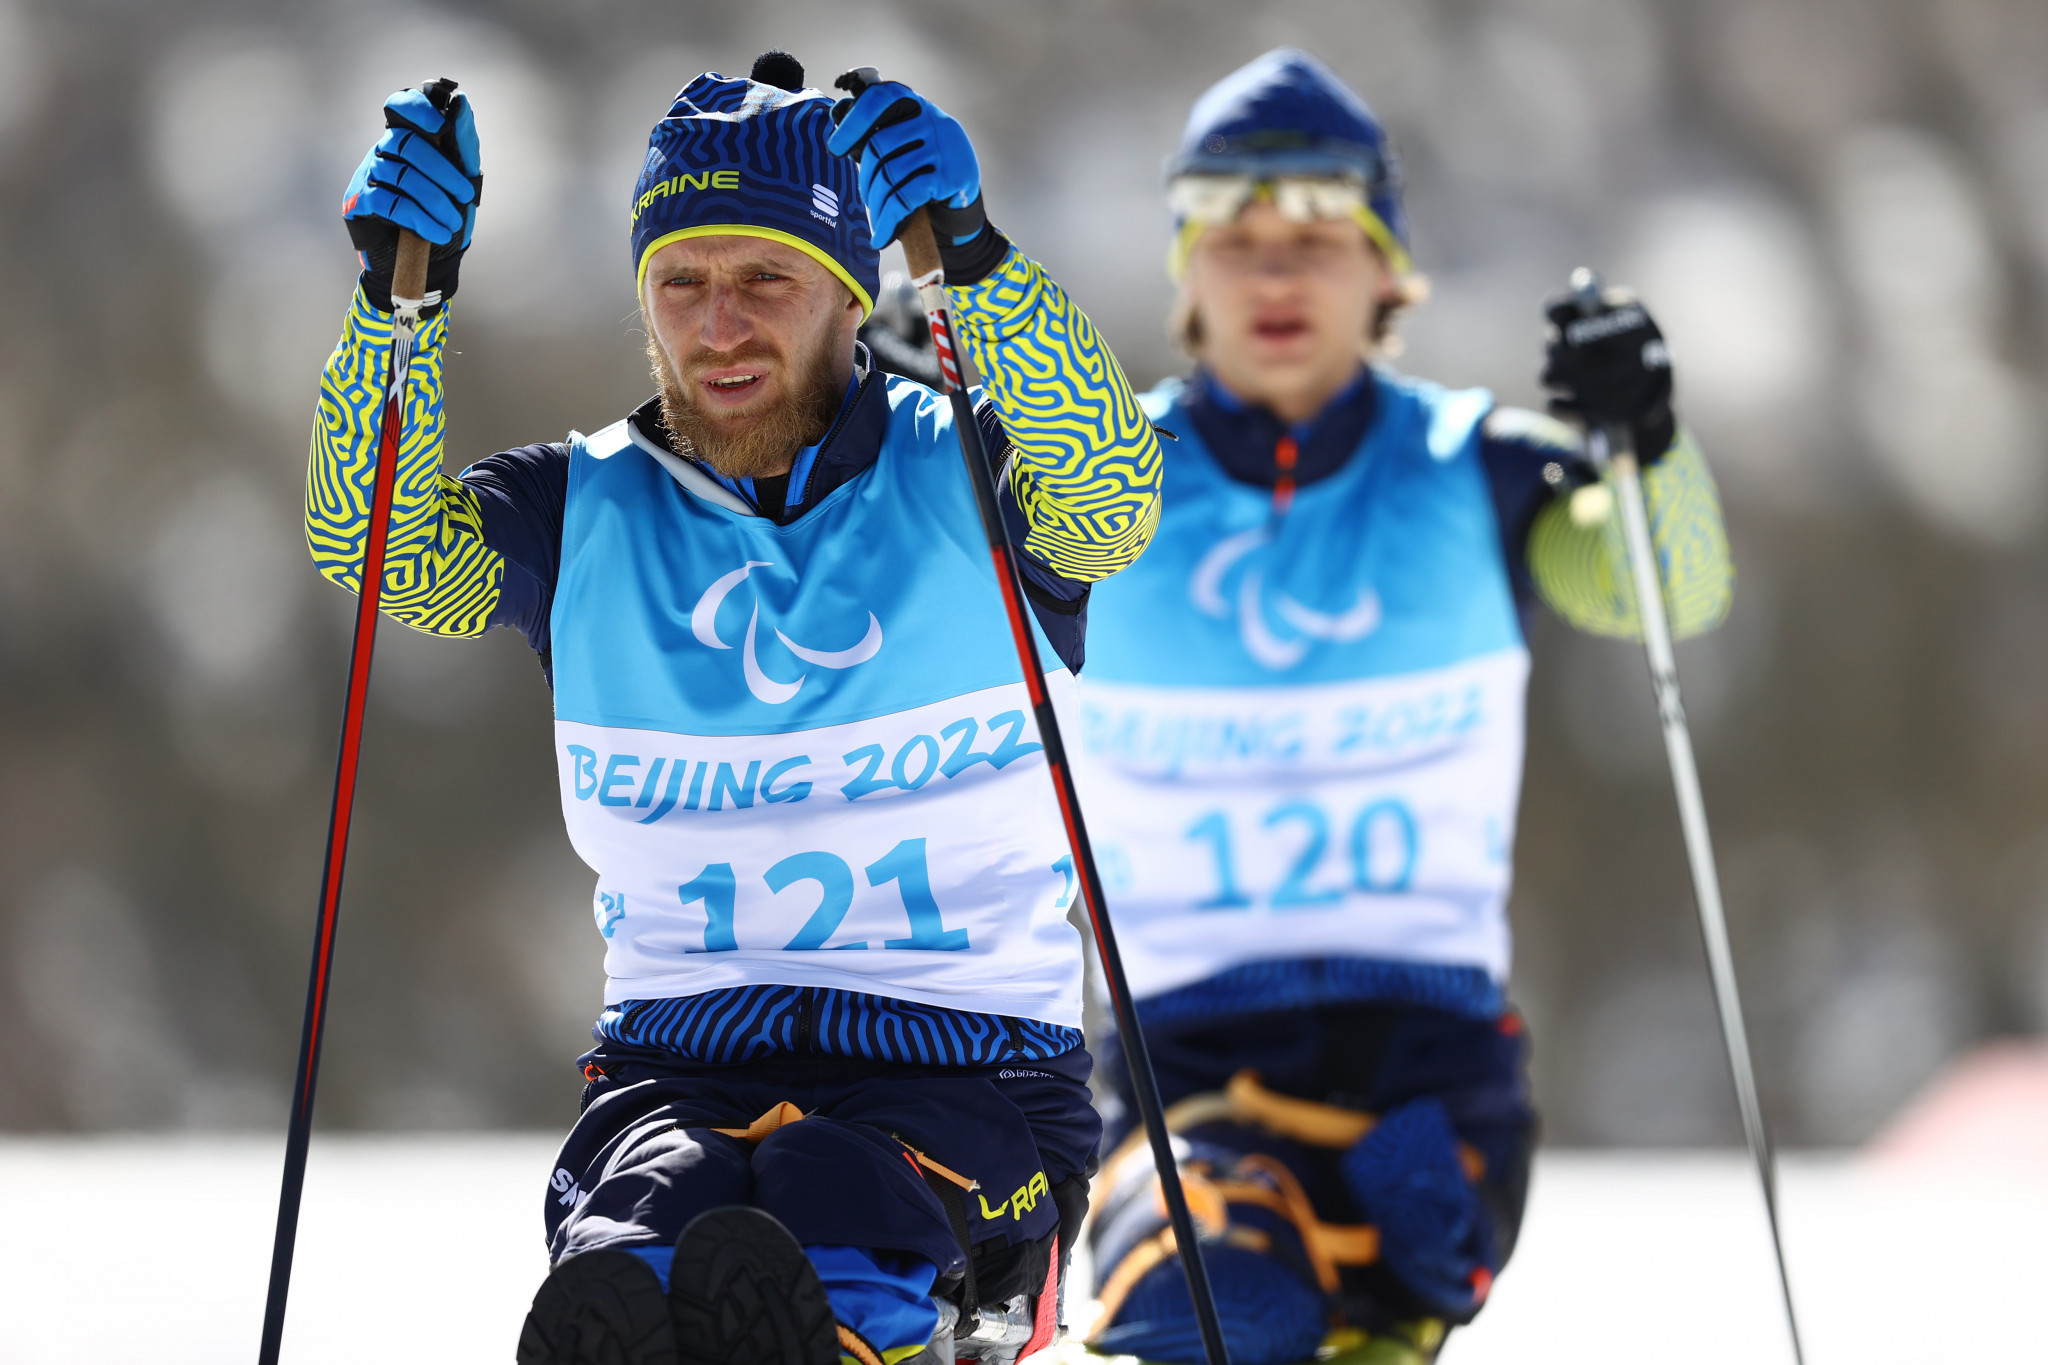 Russia ban means Ukraine well placed for emotional biathlon wins at Beijing 2022 Winter Paralympics